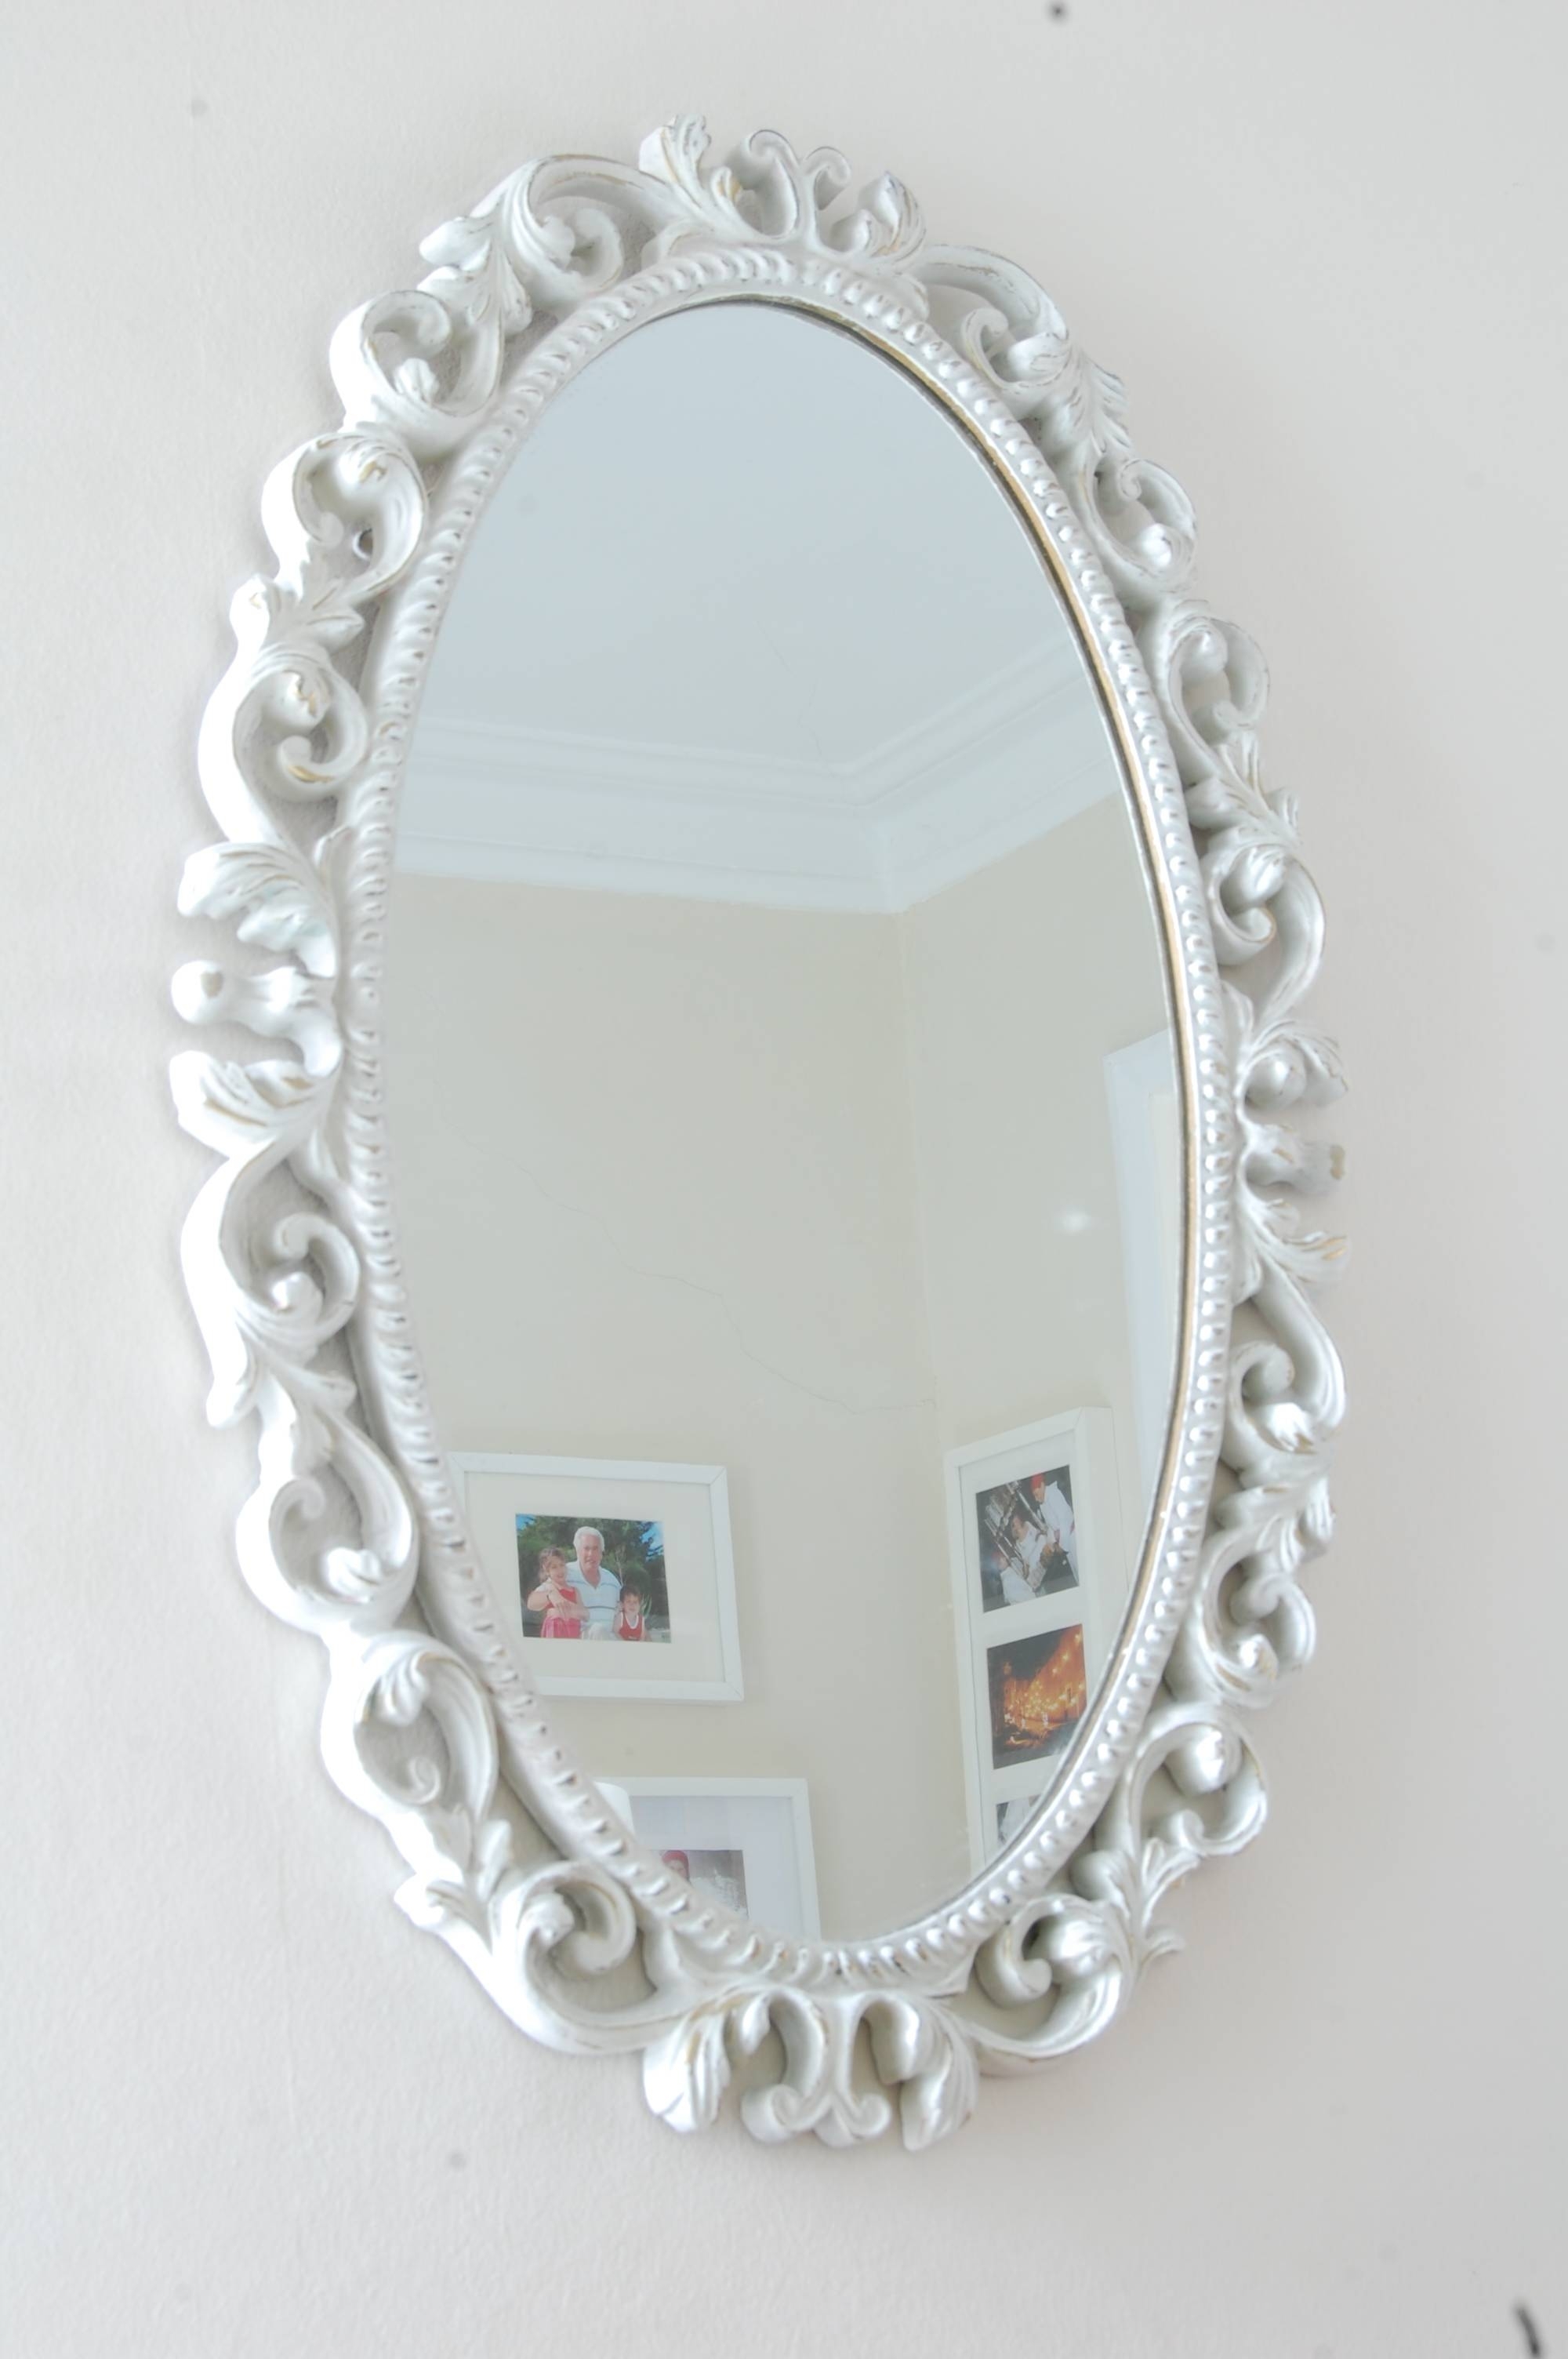 Antique oval mirrors mirror oval wall bevelled